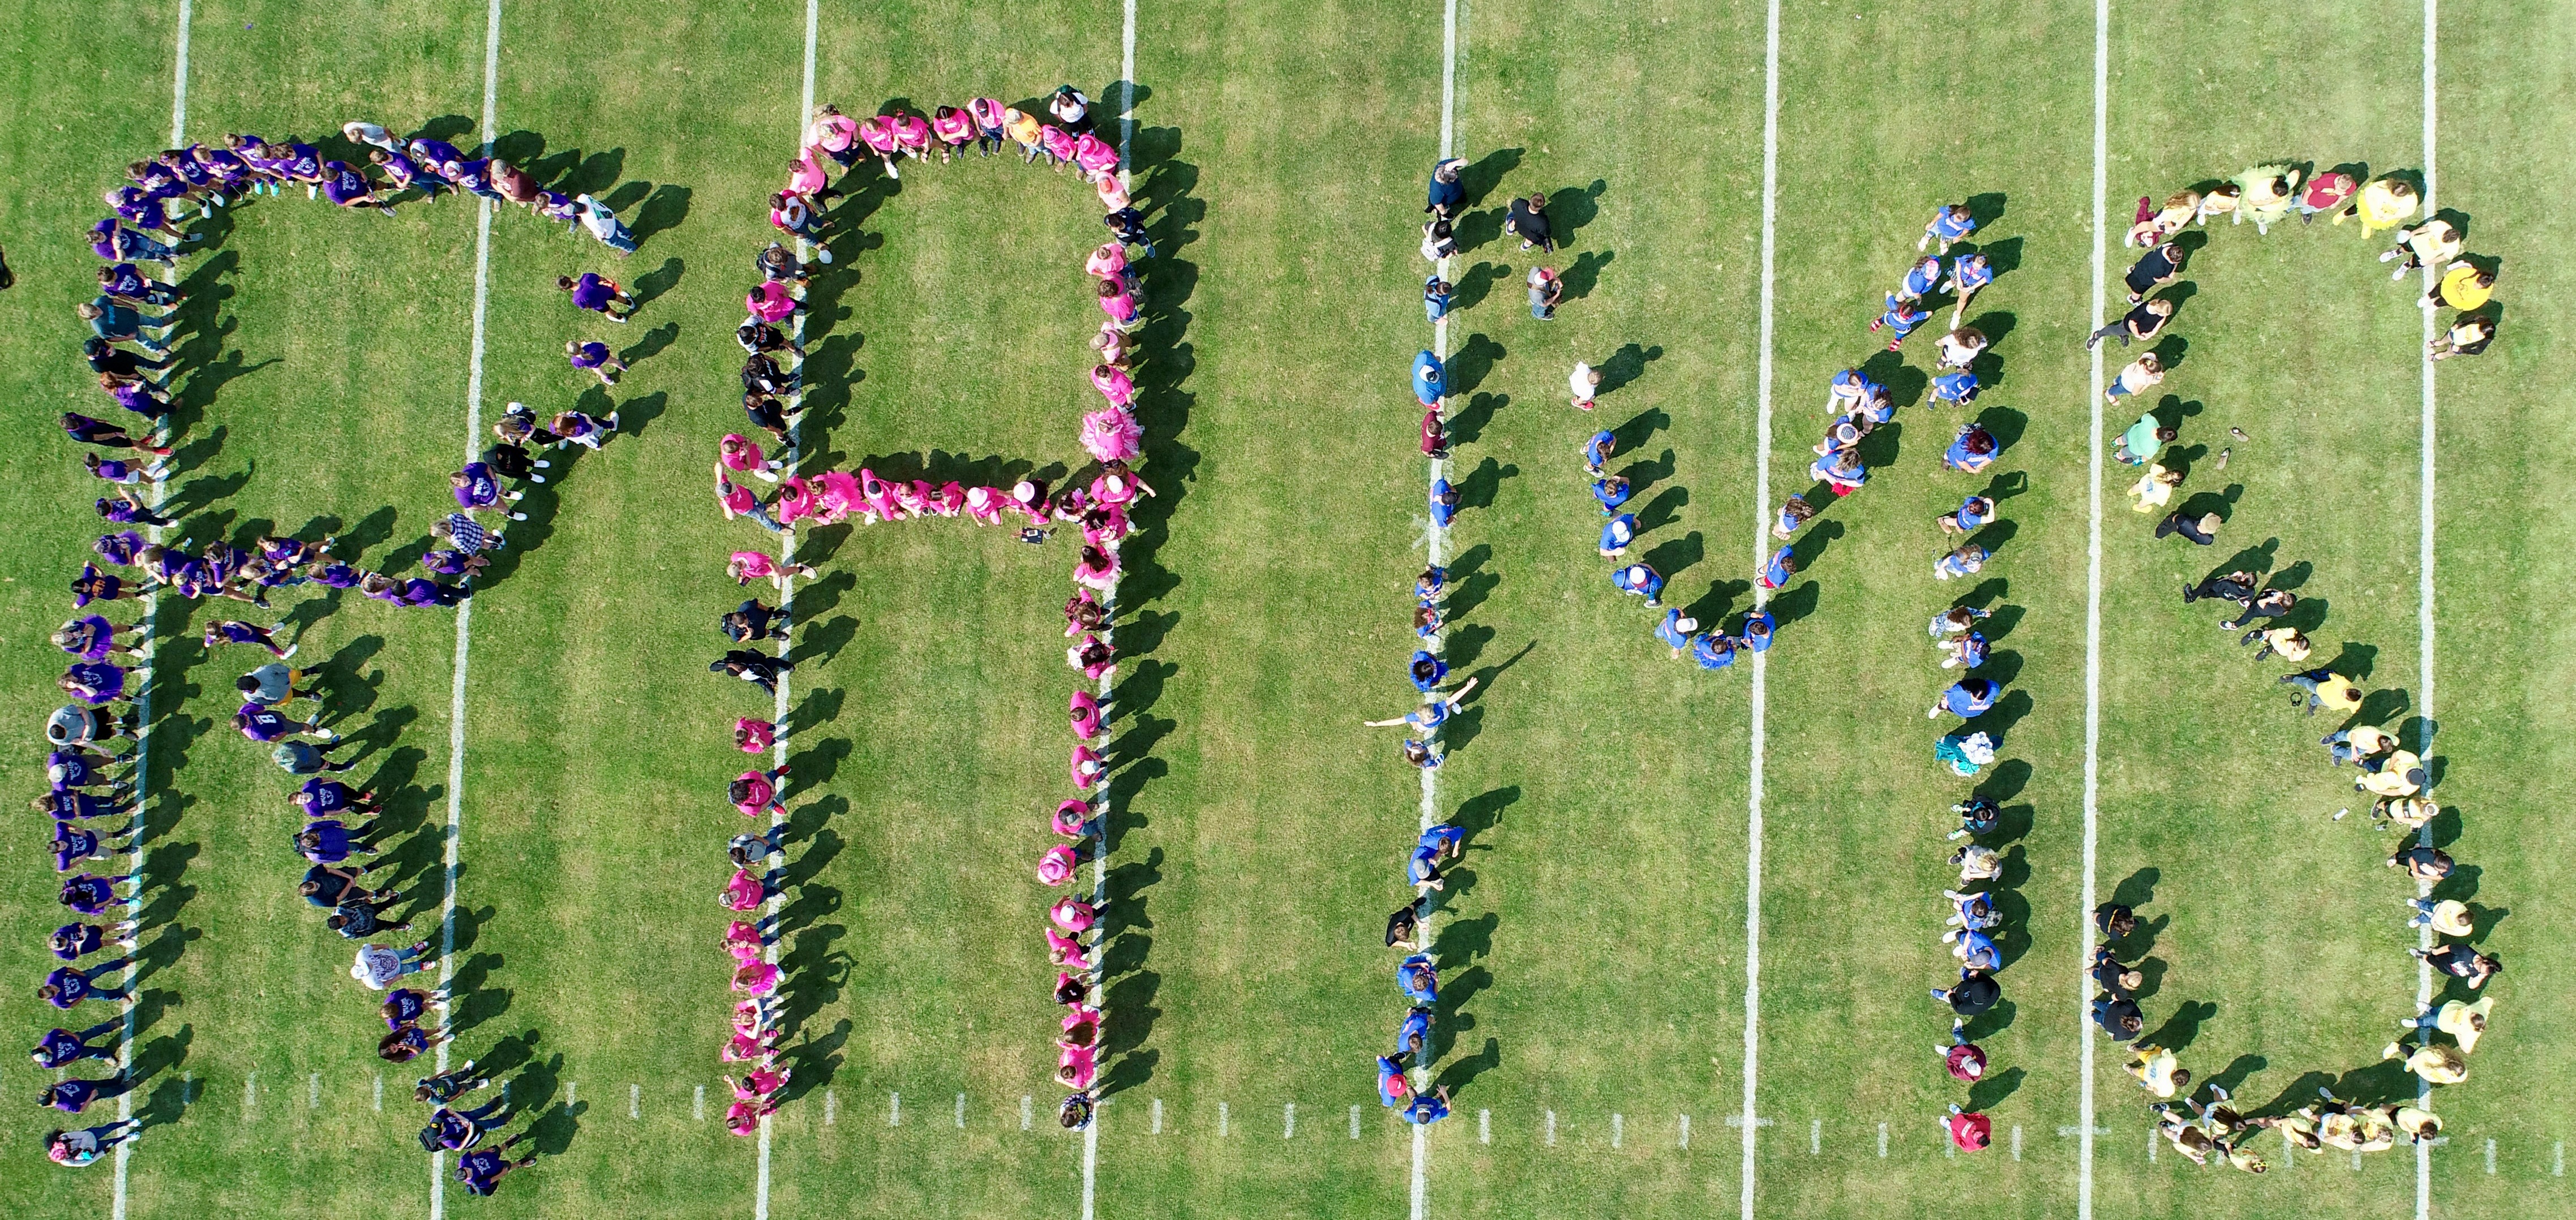 Students forming "Rams" on the football field for a drone photo.